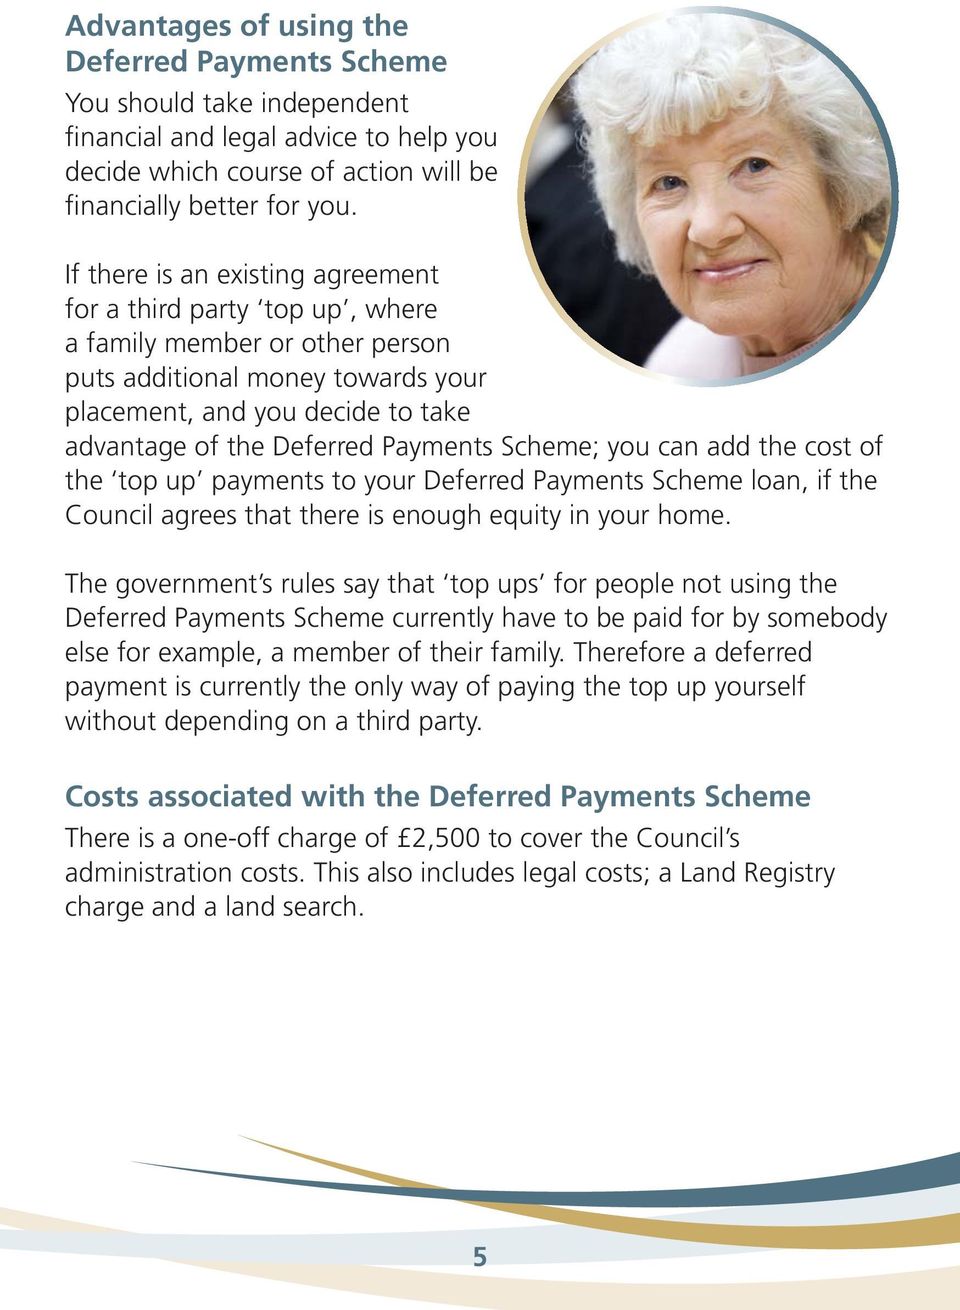 Payments Scheme; you can add the cost of the top up payments to your Deferred Payments Scheme loan, if the Council agrees that there is enough equity in your home.